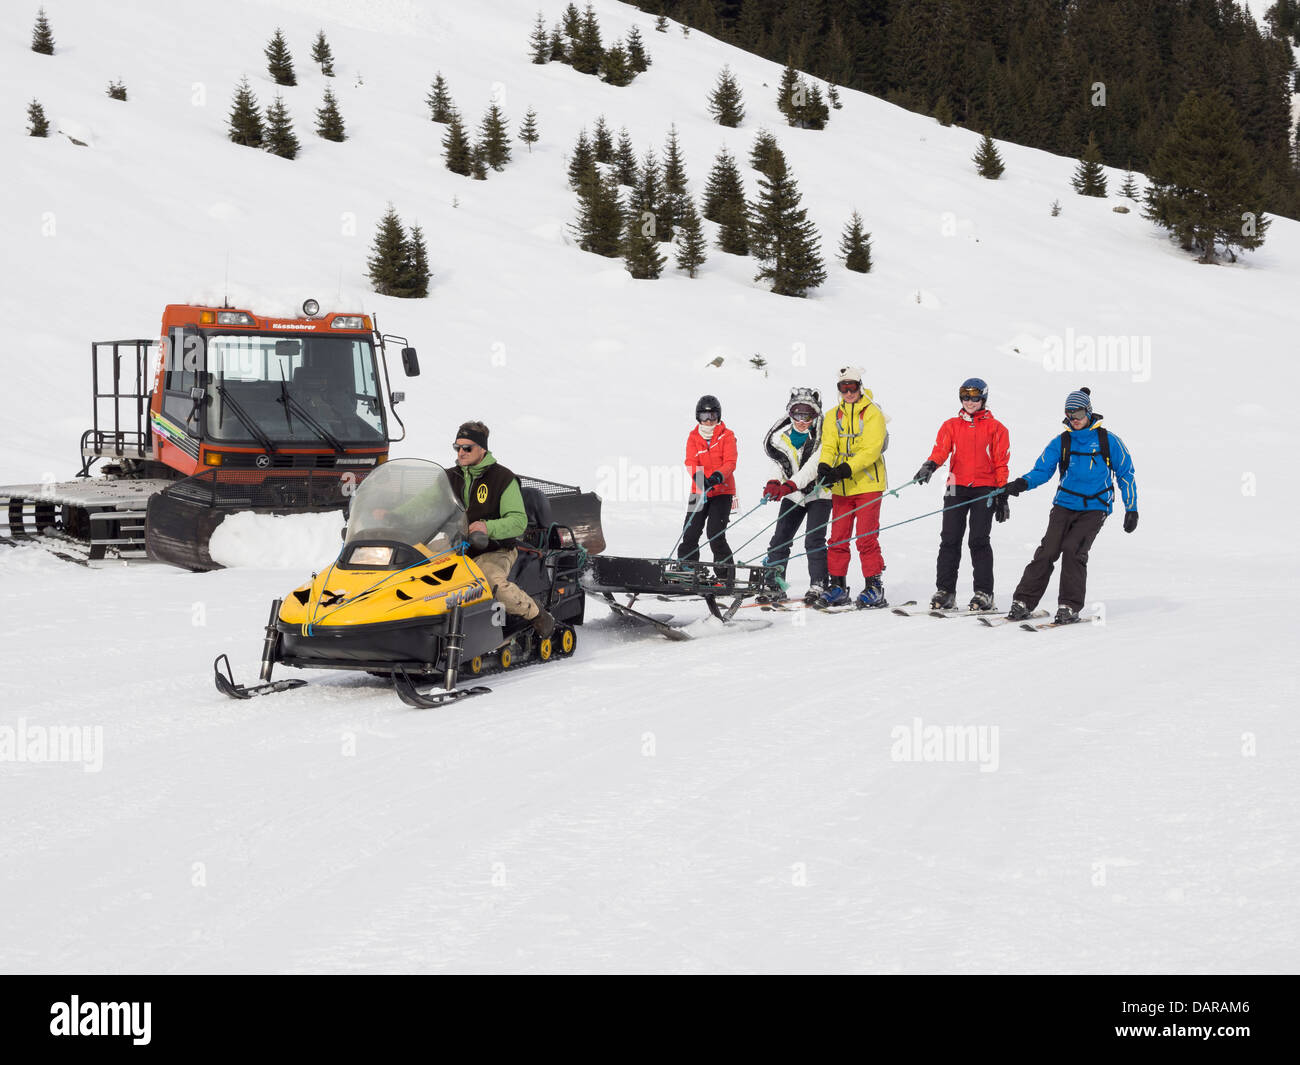 Skiers being towed by free Ski-doo snowmobile ride to Gite du Lac de Gers restaurant in Le Grand Massif ski area. Samoëns France Stock Photo